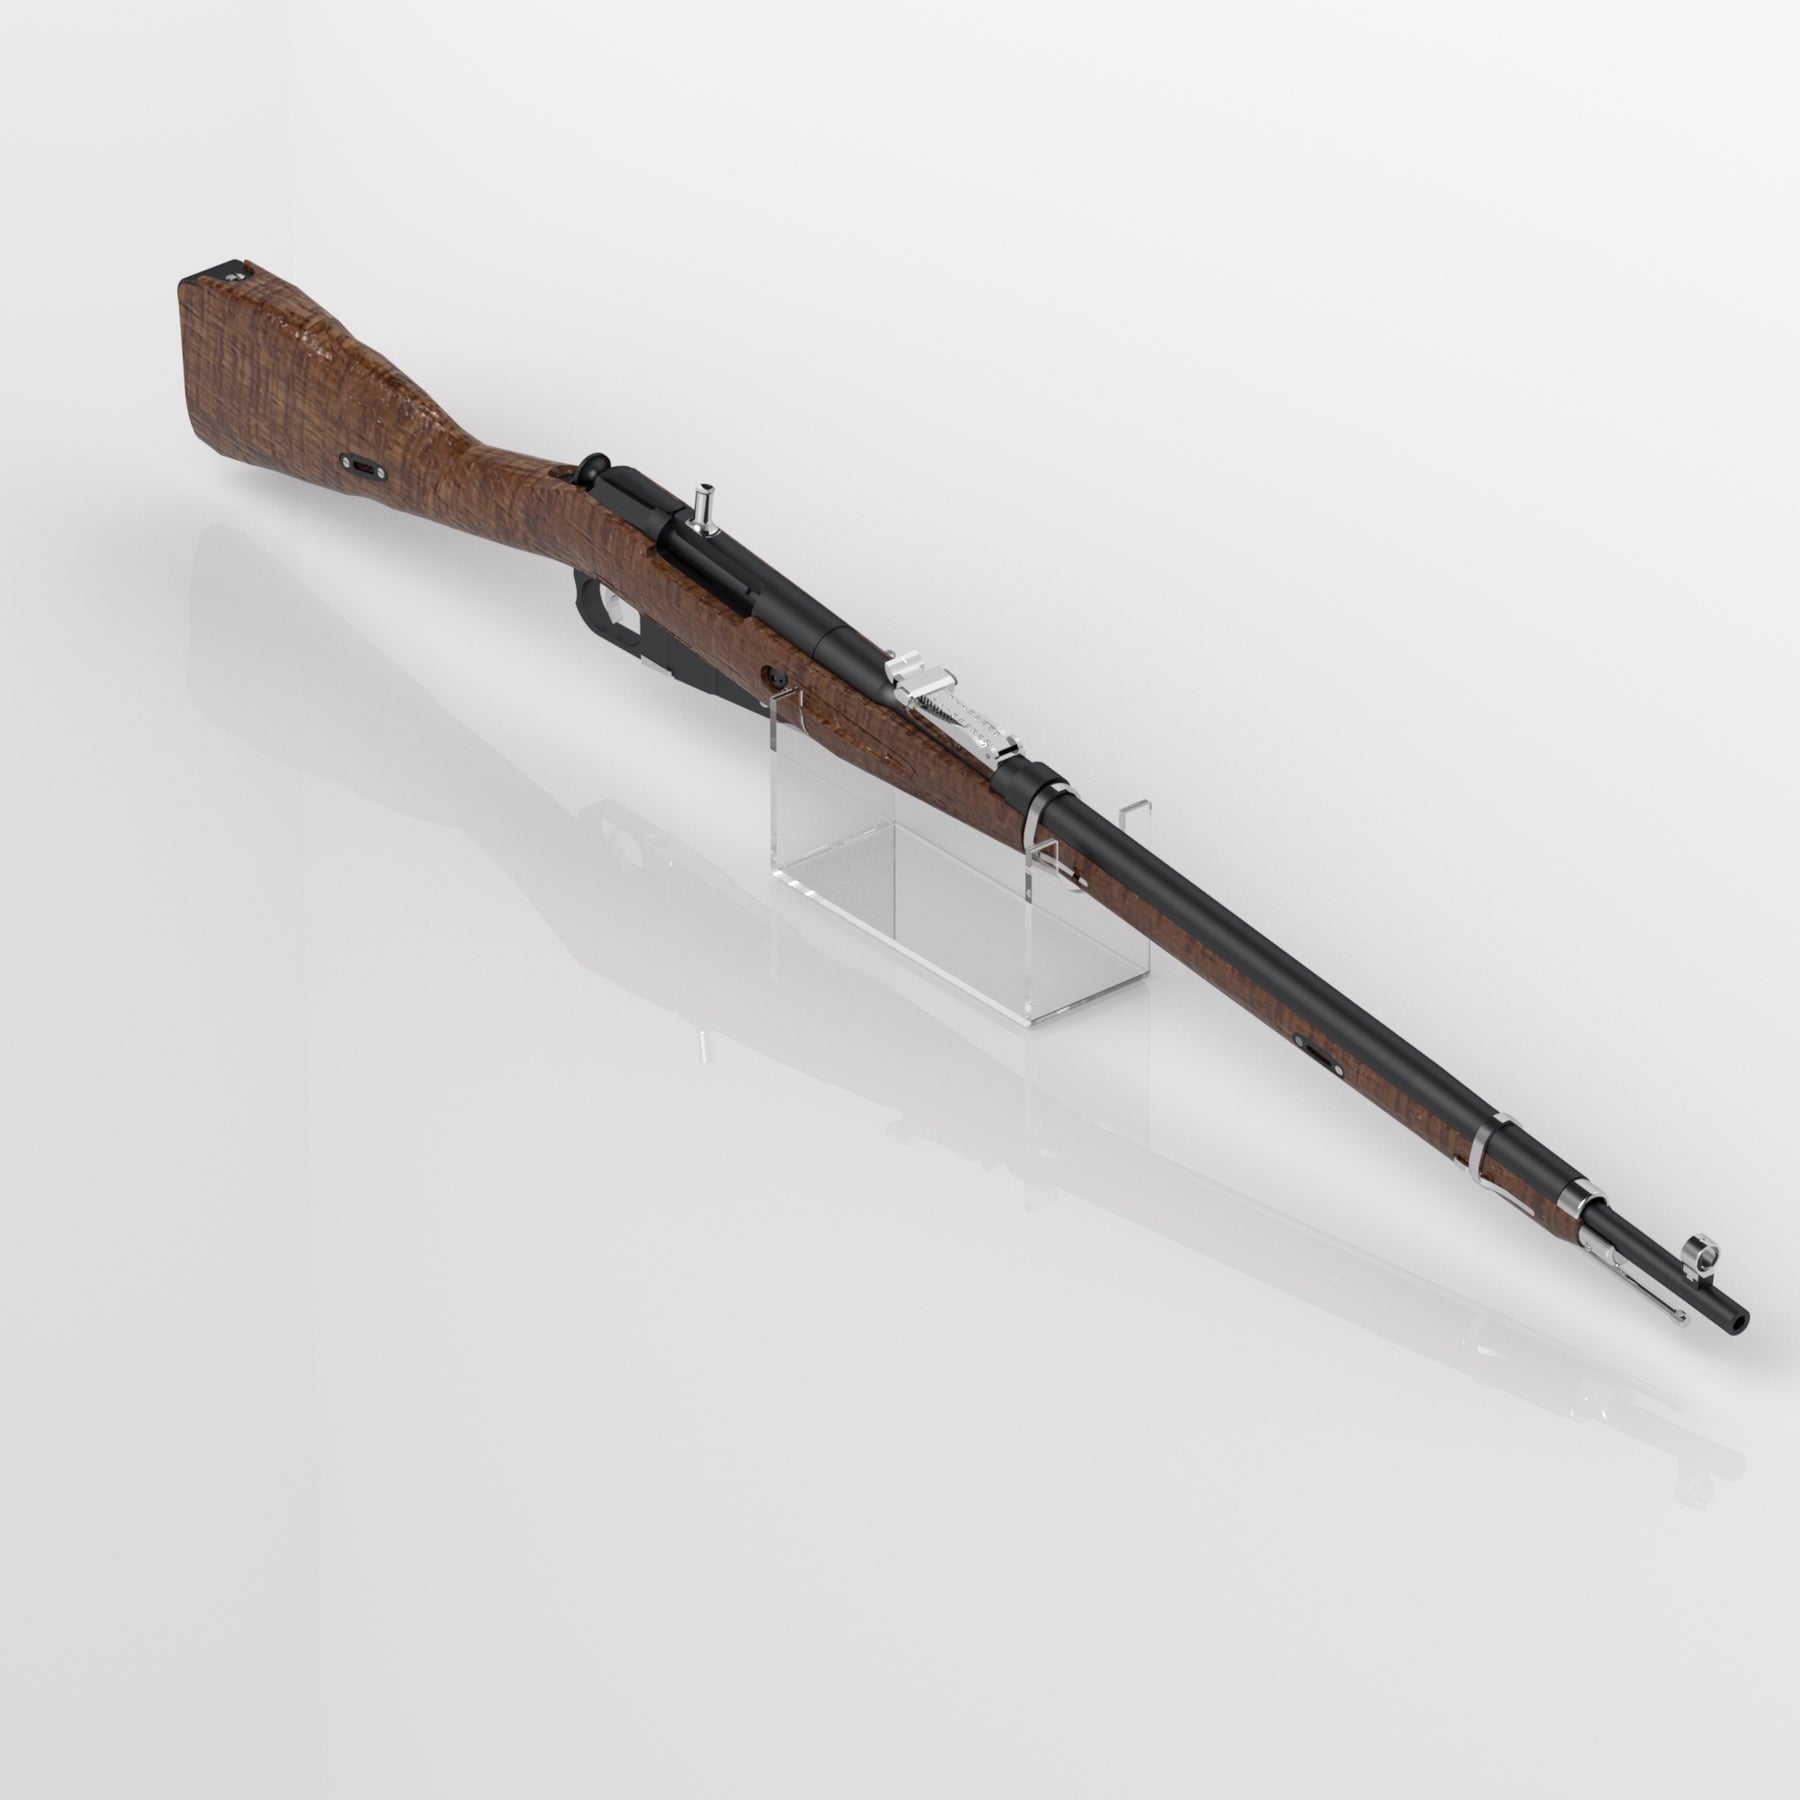 Freestanding Rifle Display Stand / PW-19